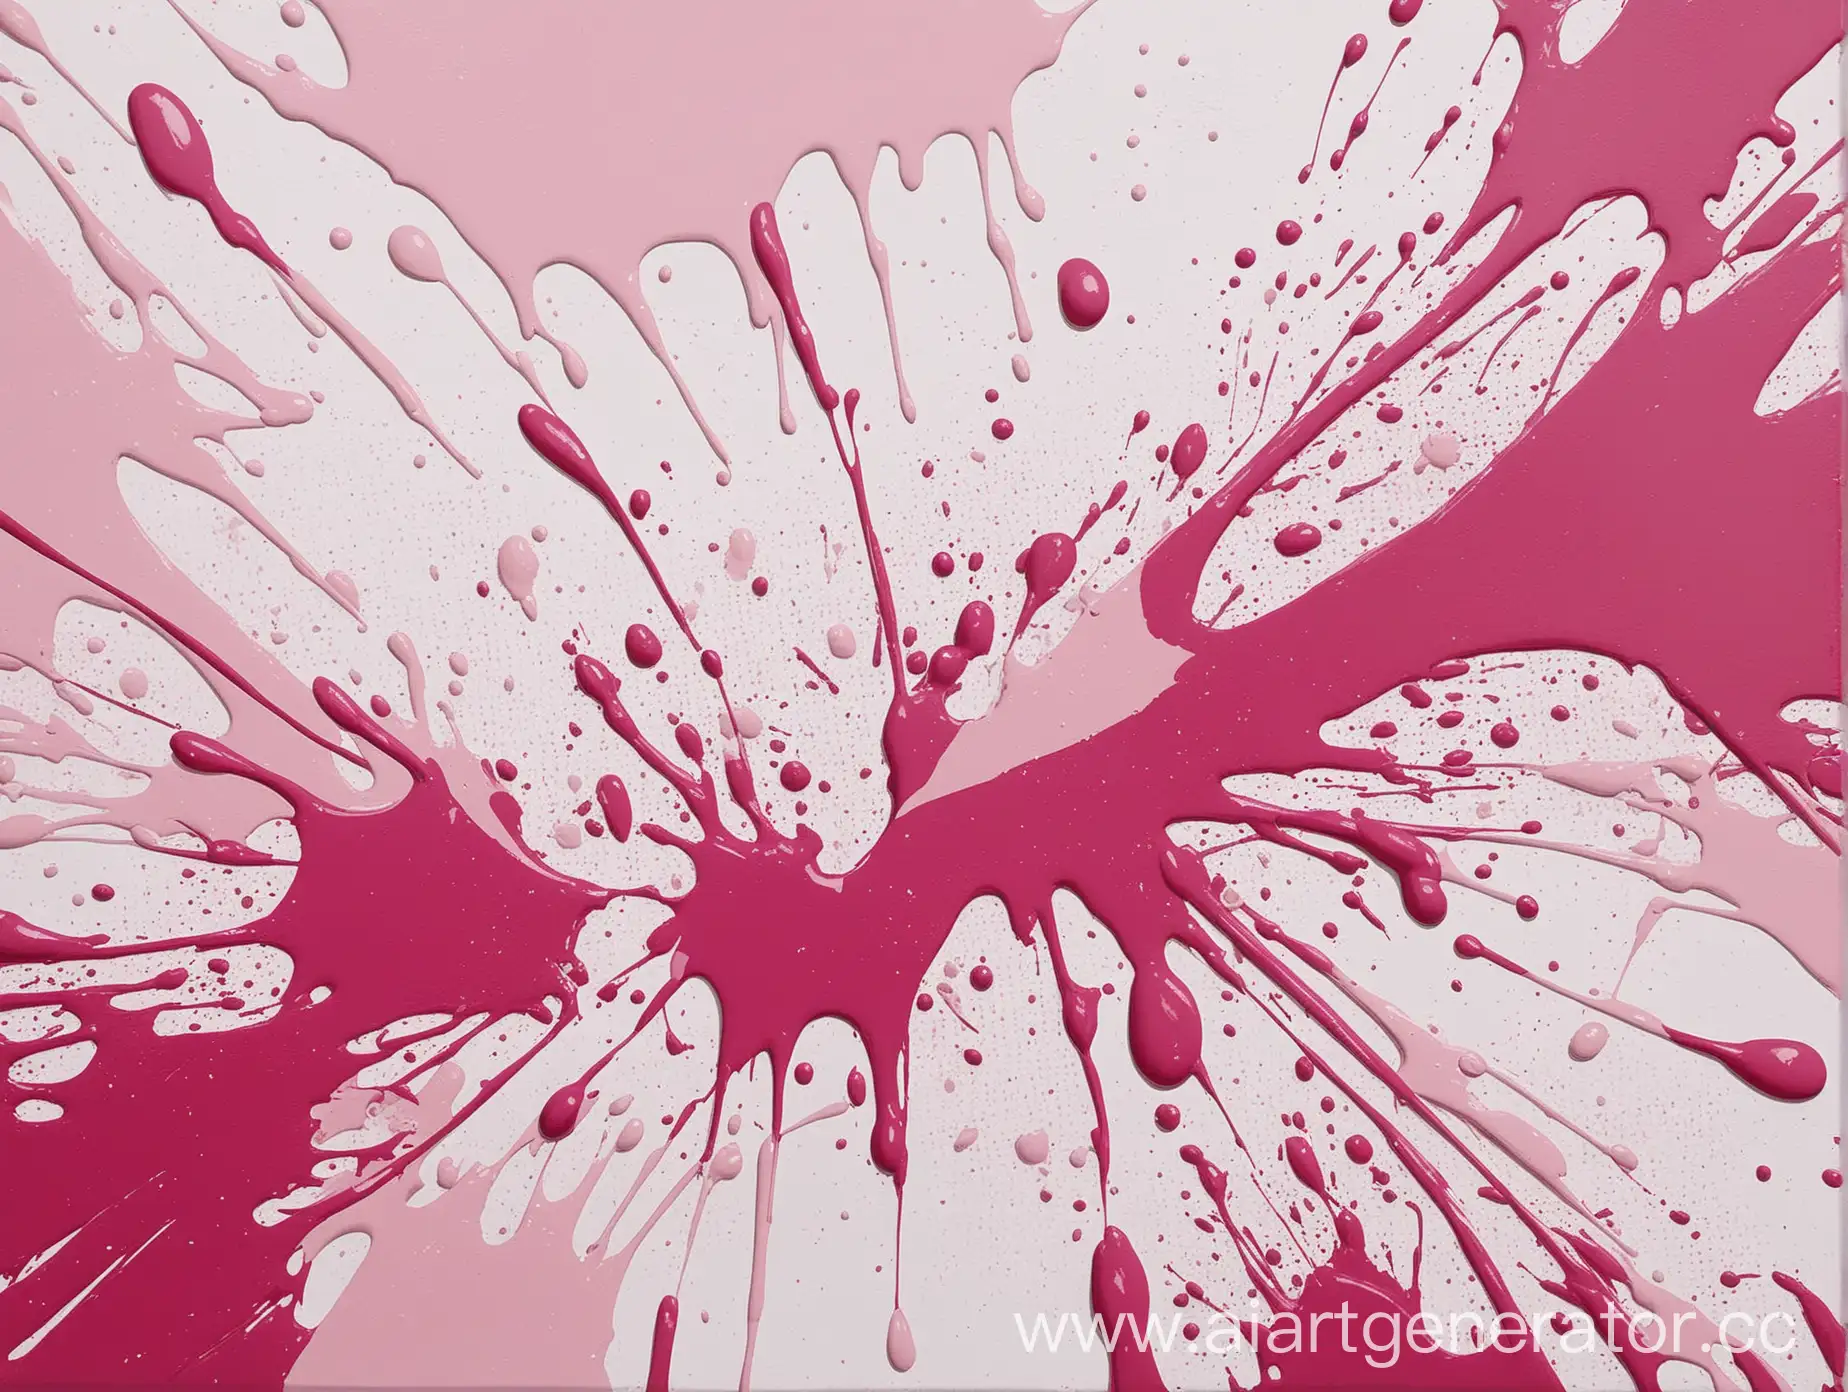 Abstract-Artwork-Splatters-of-Paint-in-WhitePink-Tones